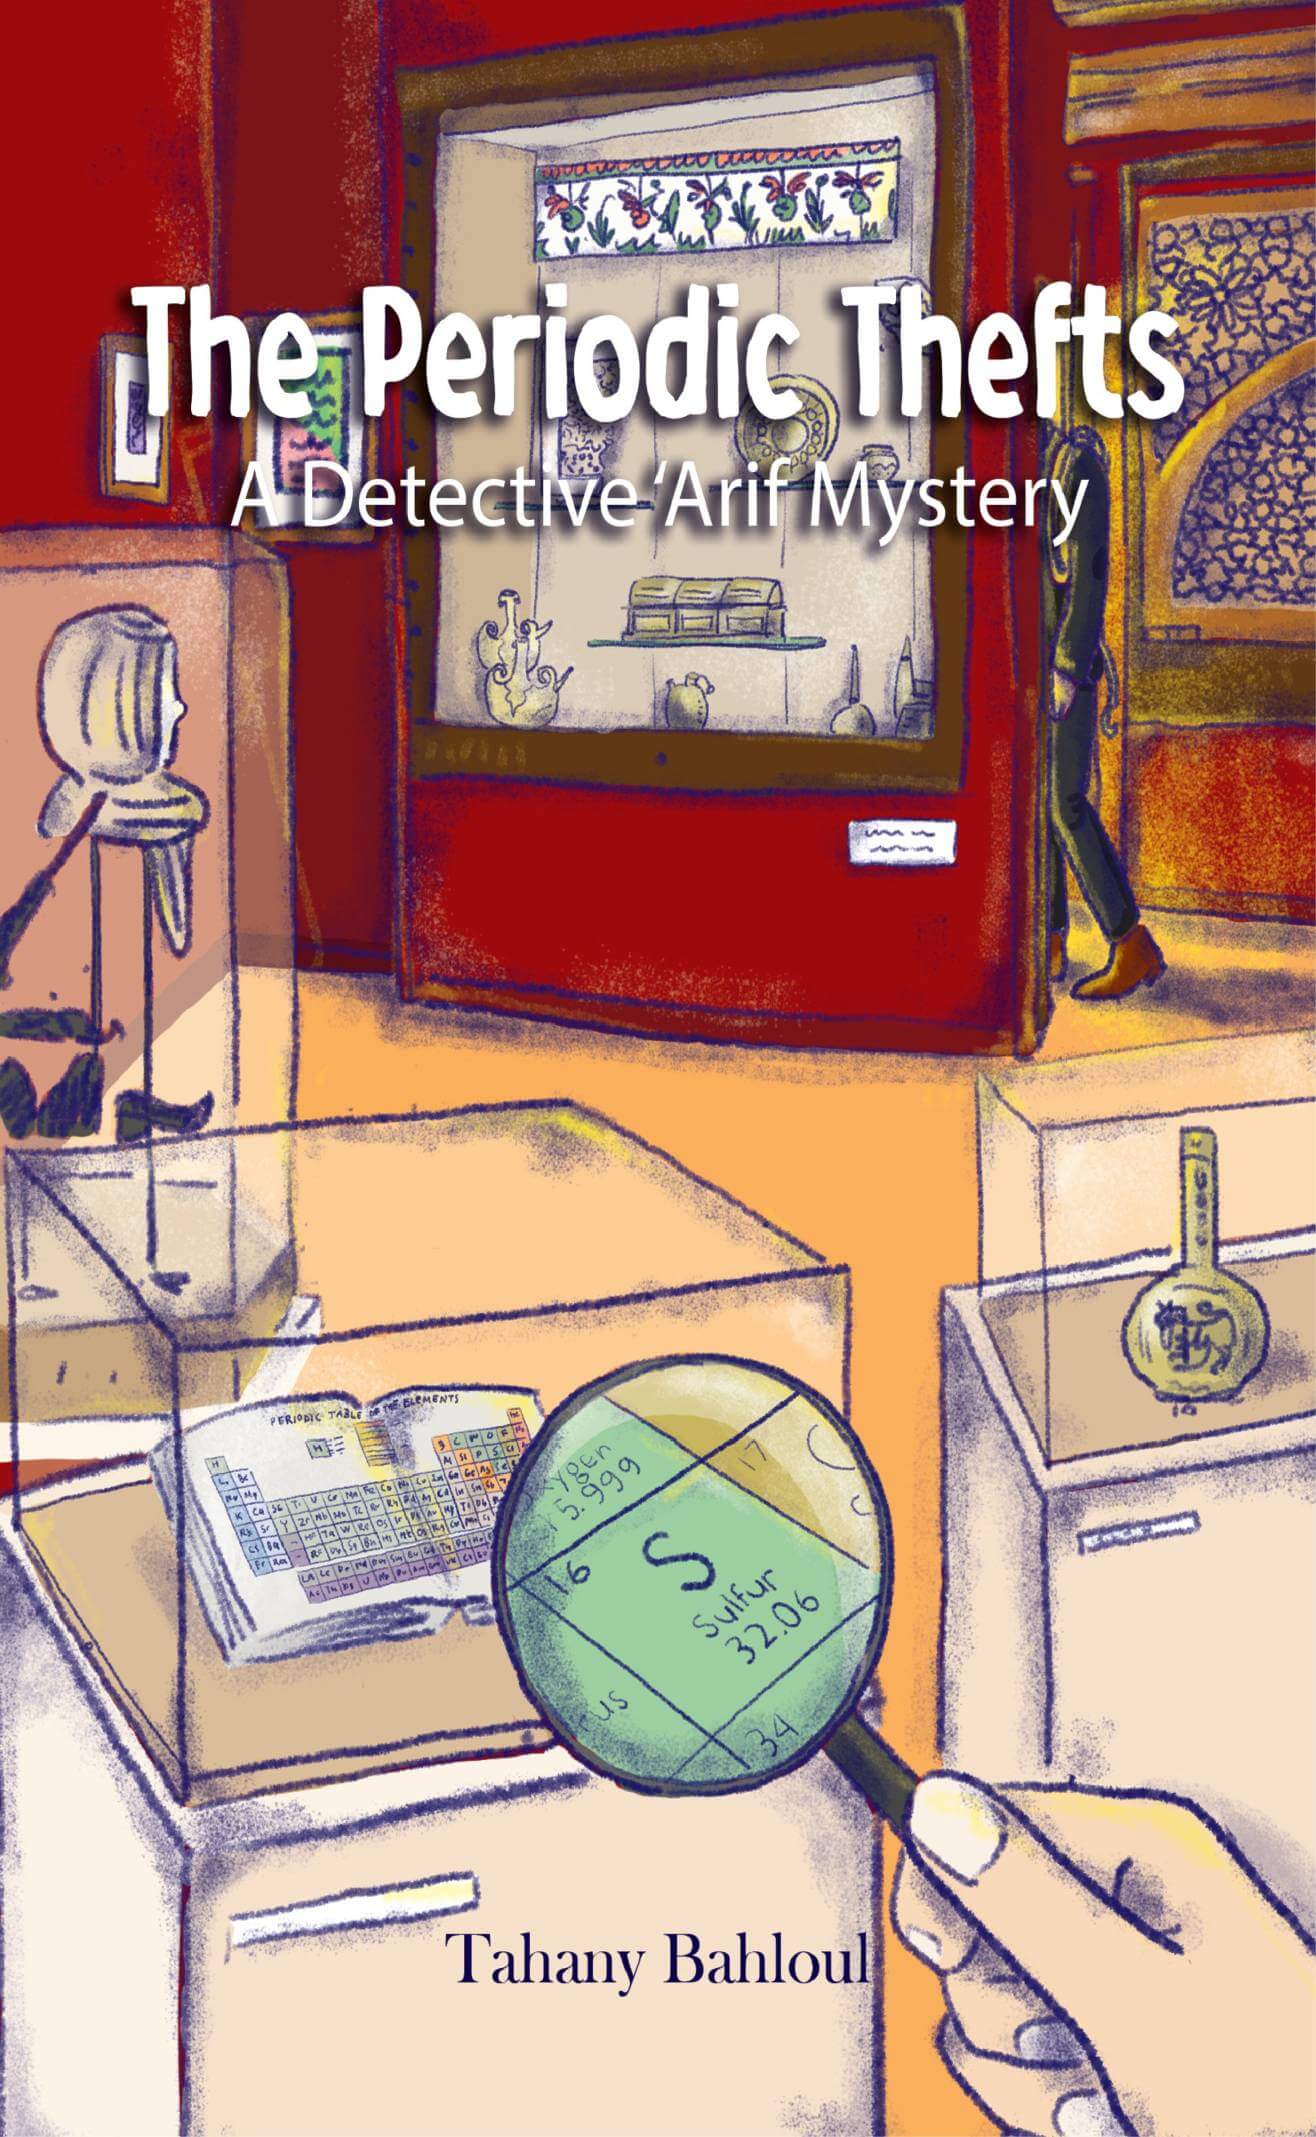 The Periodic Thefts: A Detective ‘Arif Mystery (Revised 2nd Edition)